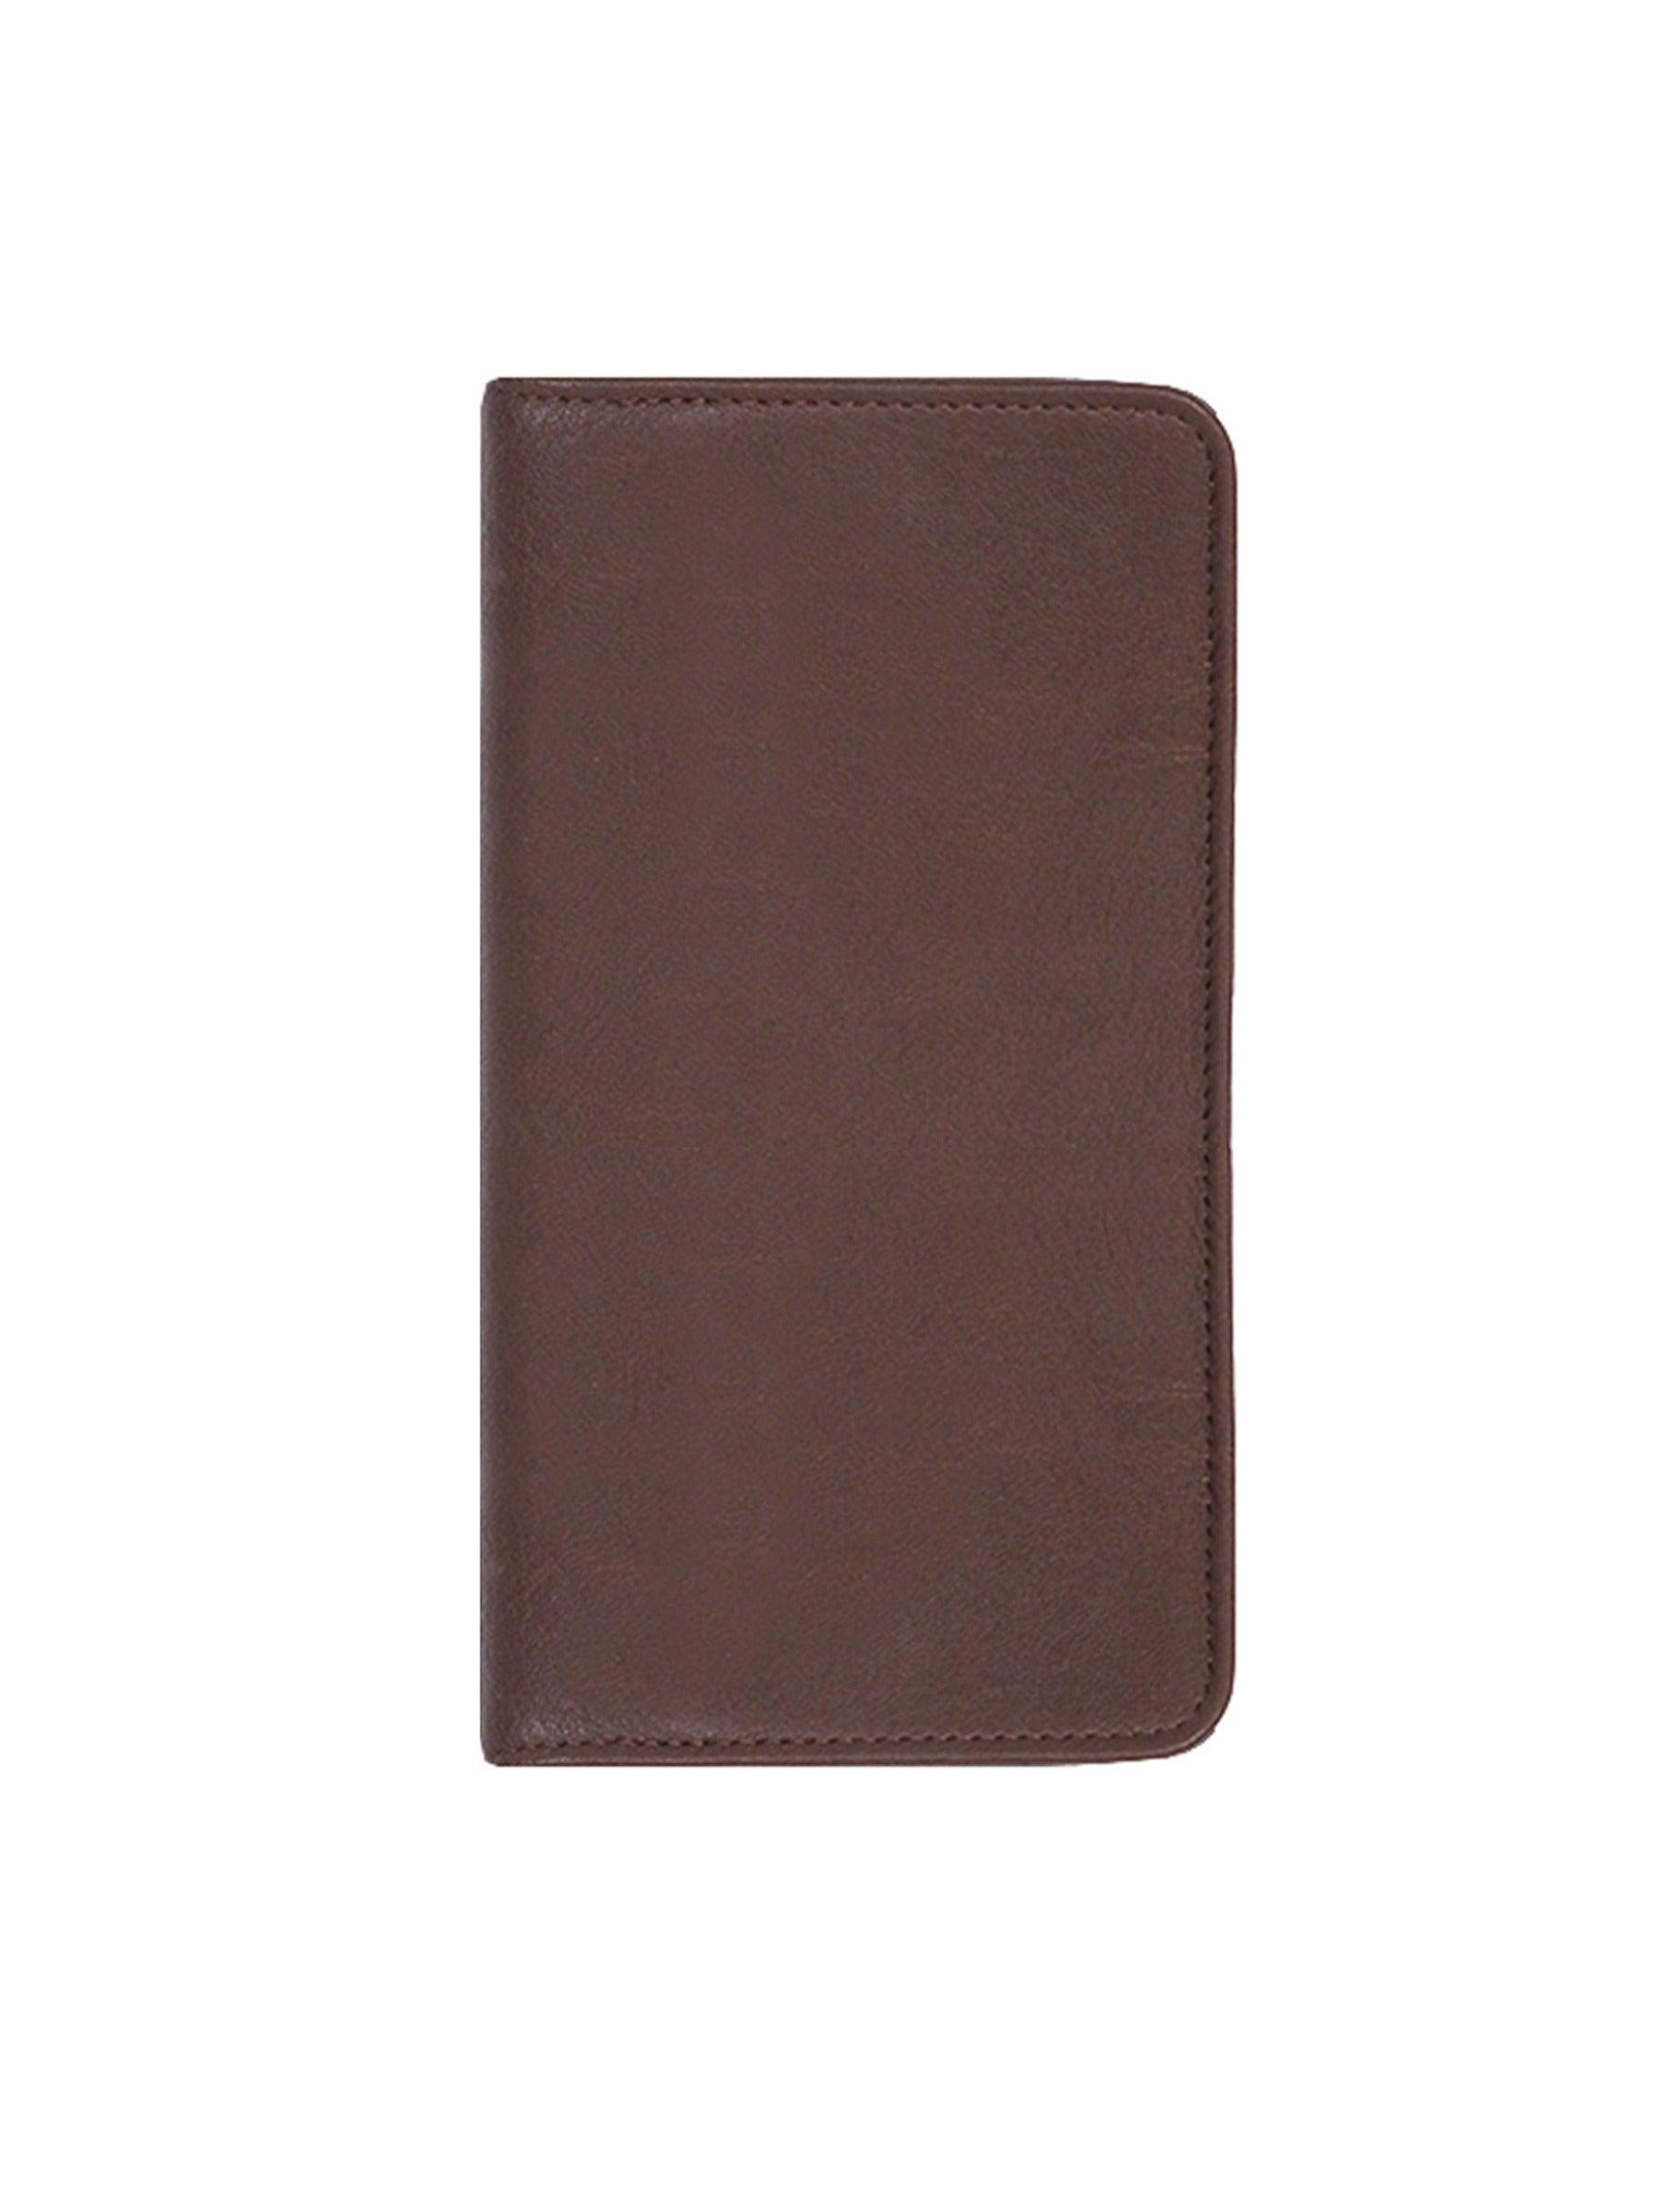 Scully Leather pocket weekly planner - Flyclothing LLC